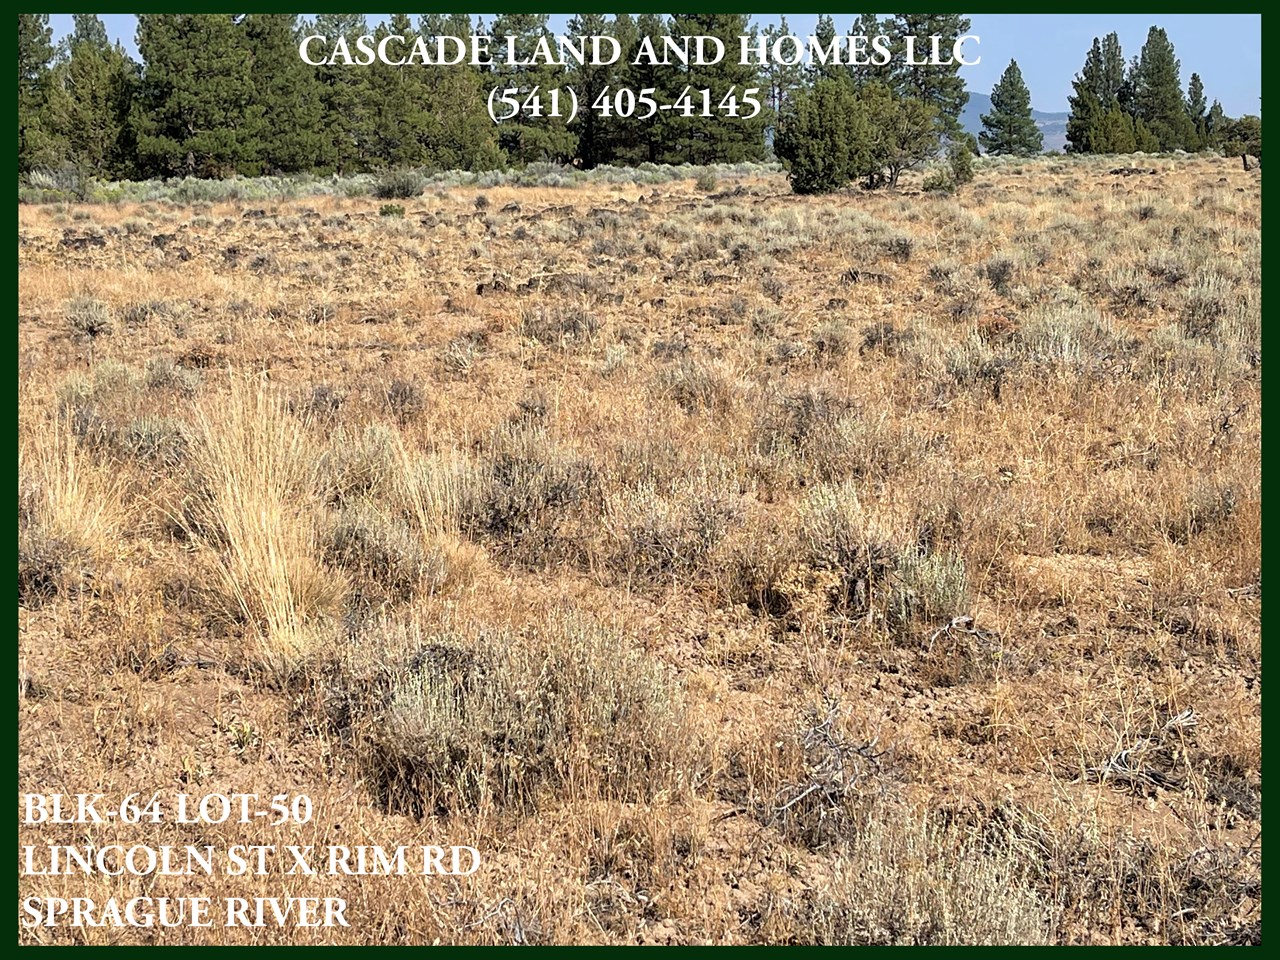 most of the property is fairly flat and it slopes downhill on one side. there is plenty of room for a home site on this large parcel ! it would need to have power, possibly solar, a well, and septic.